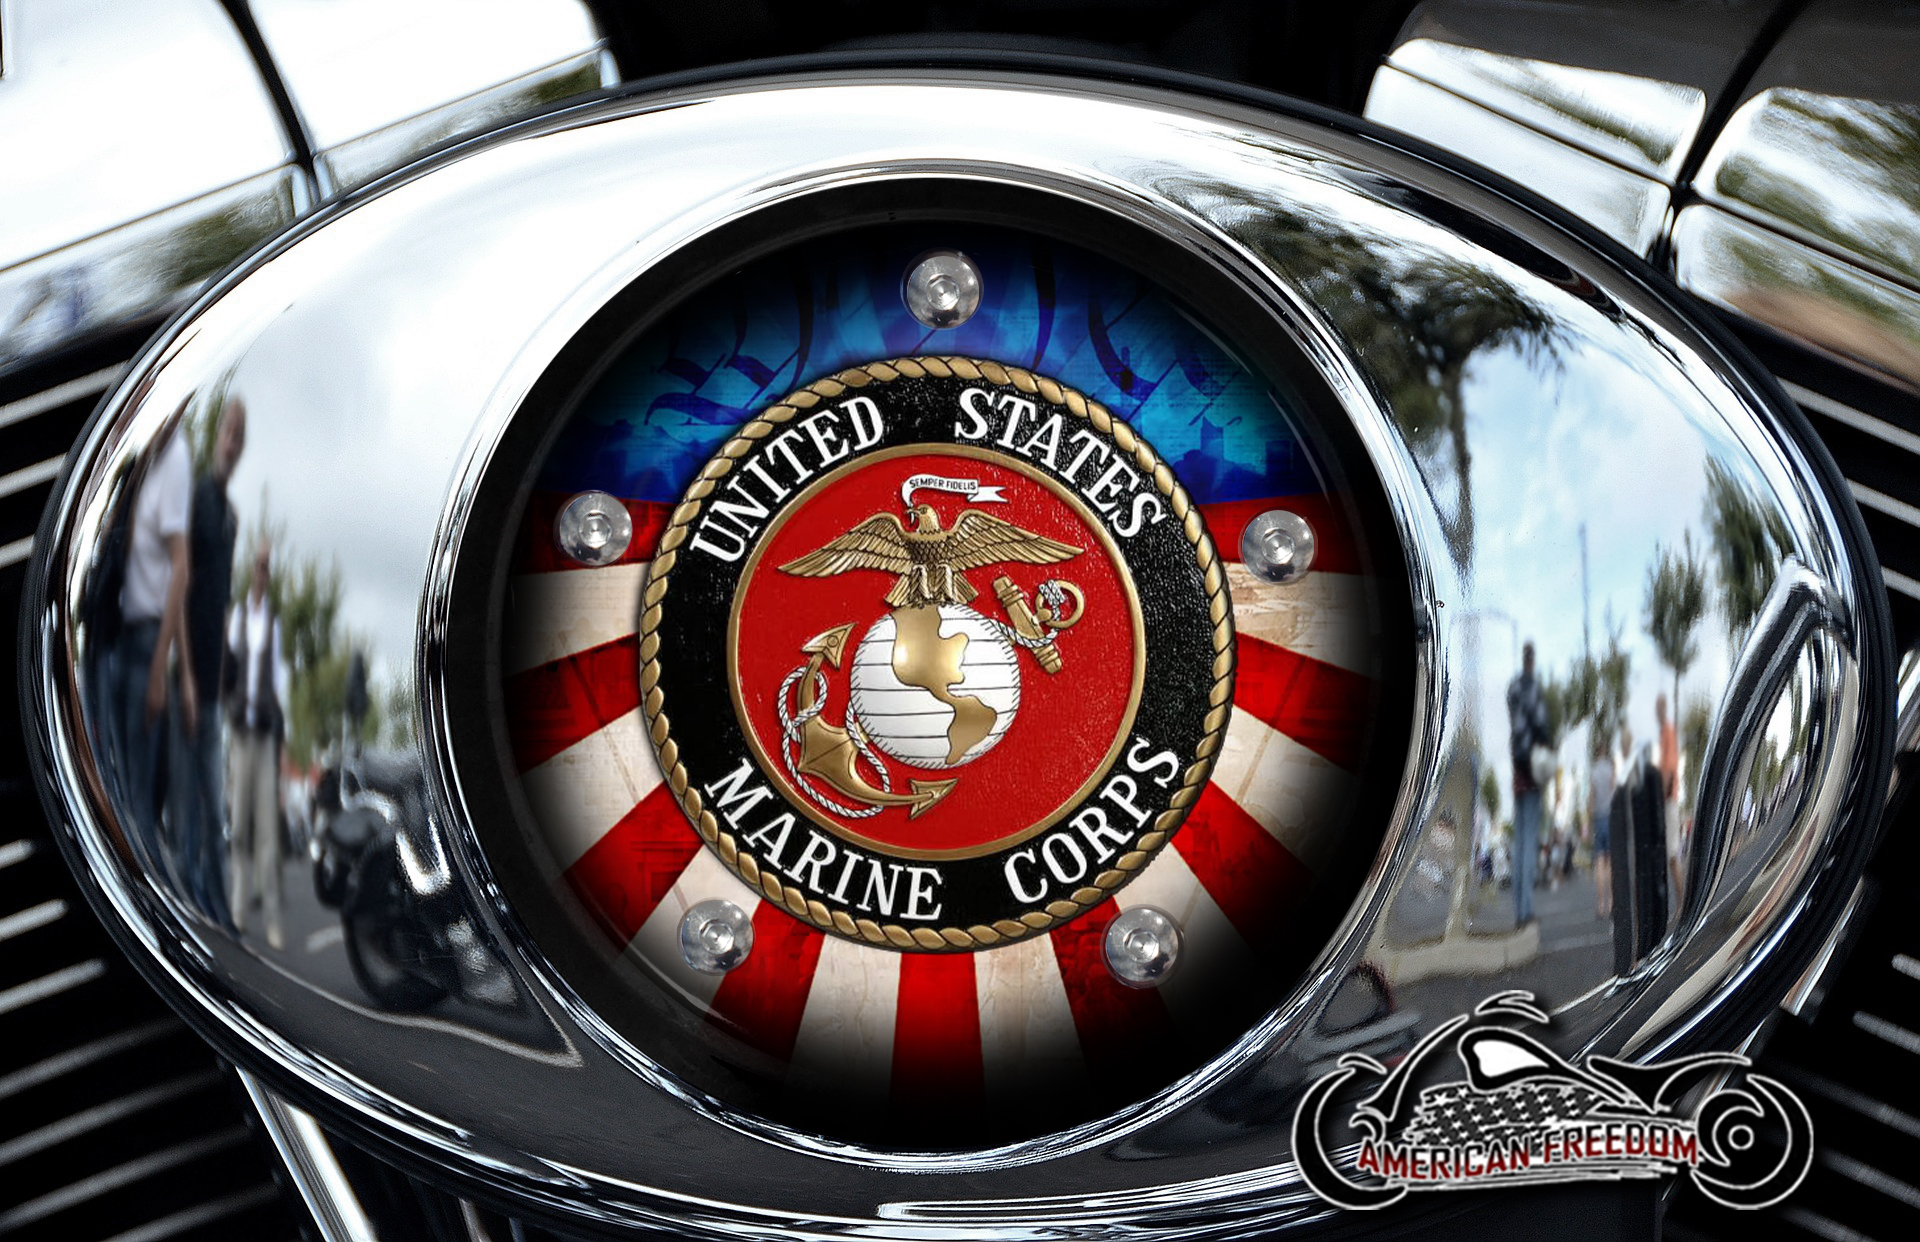 Harley Air Cleaner Cover - Marine Corps